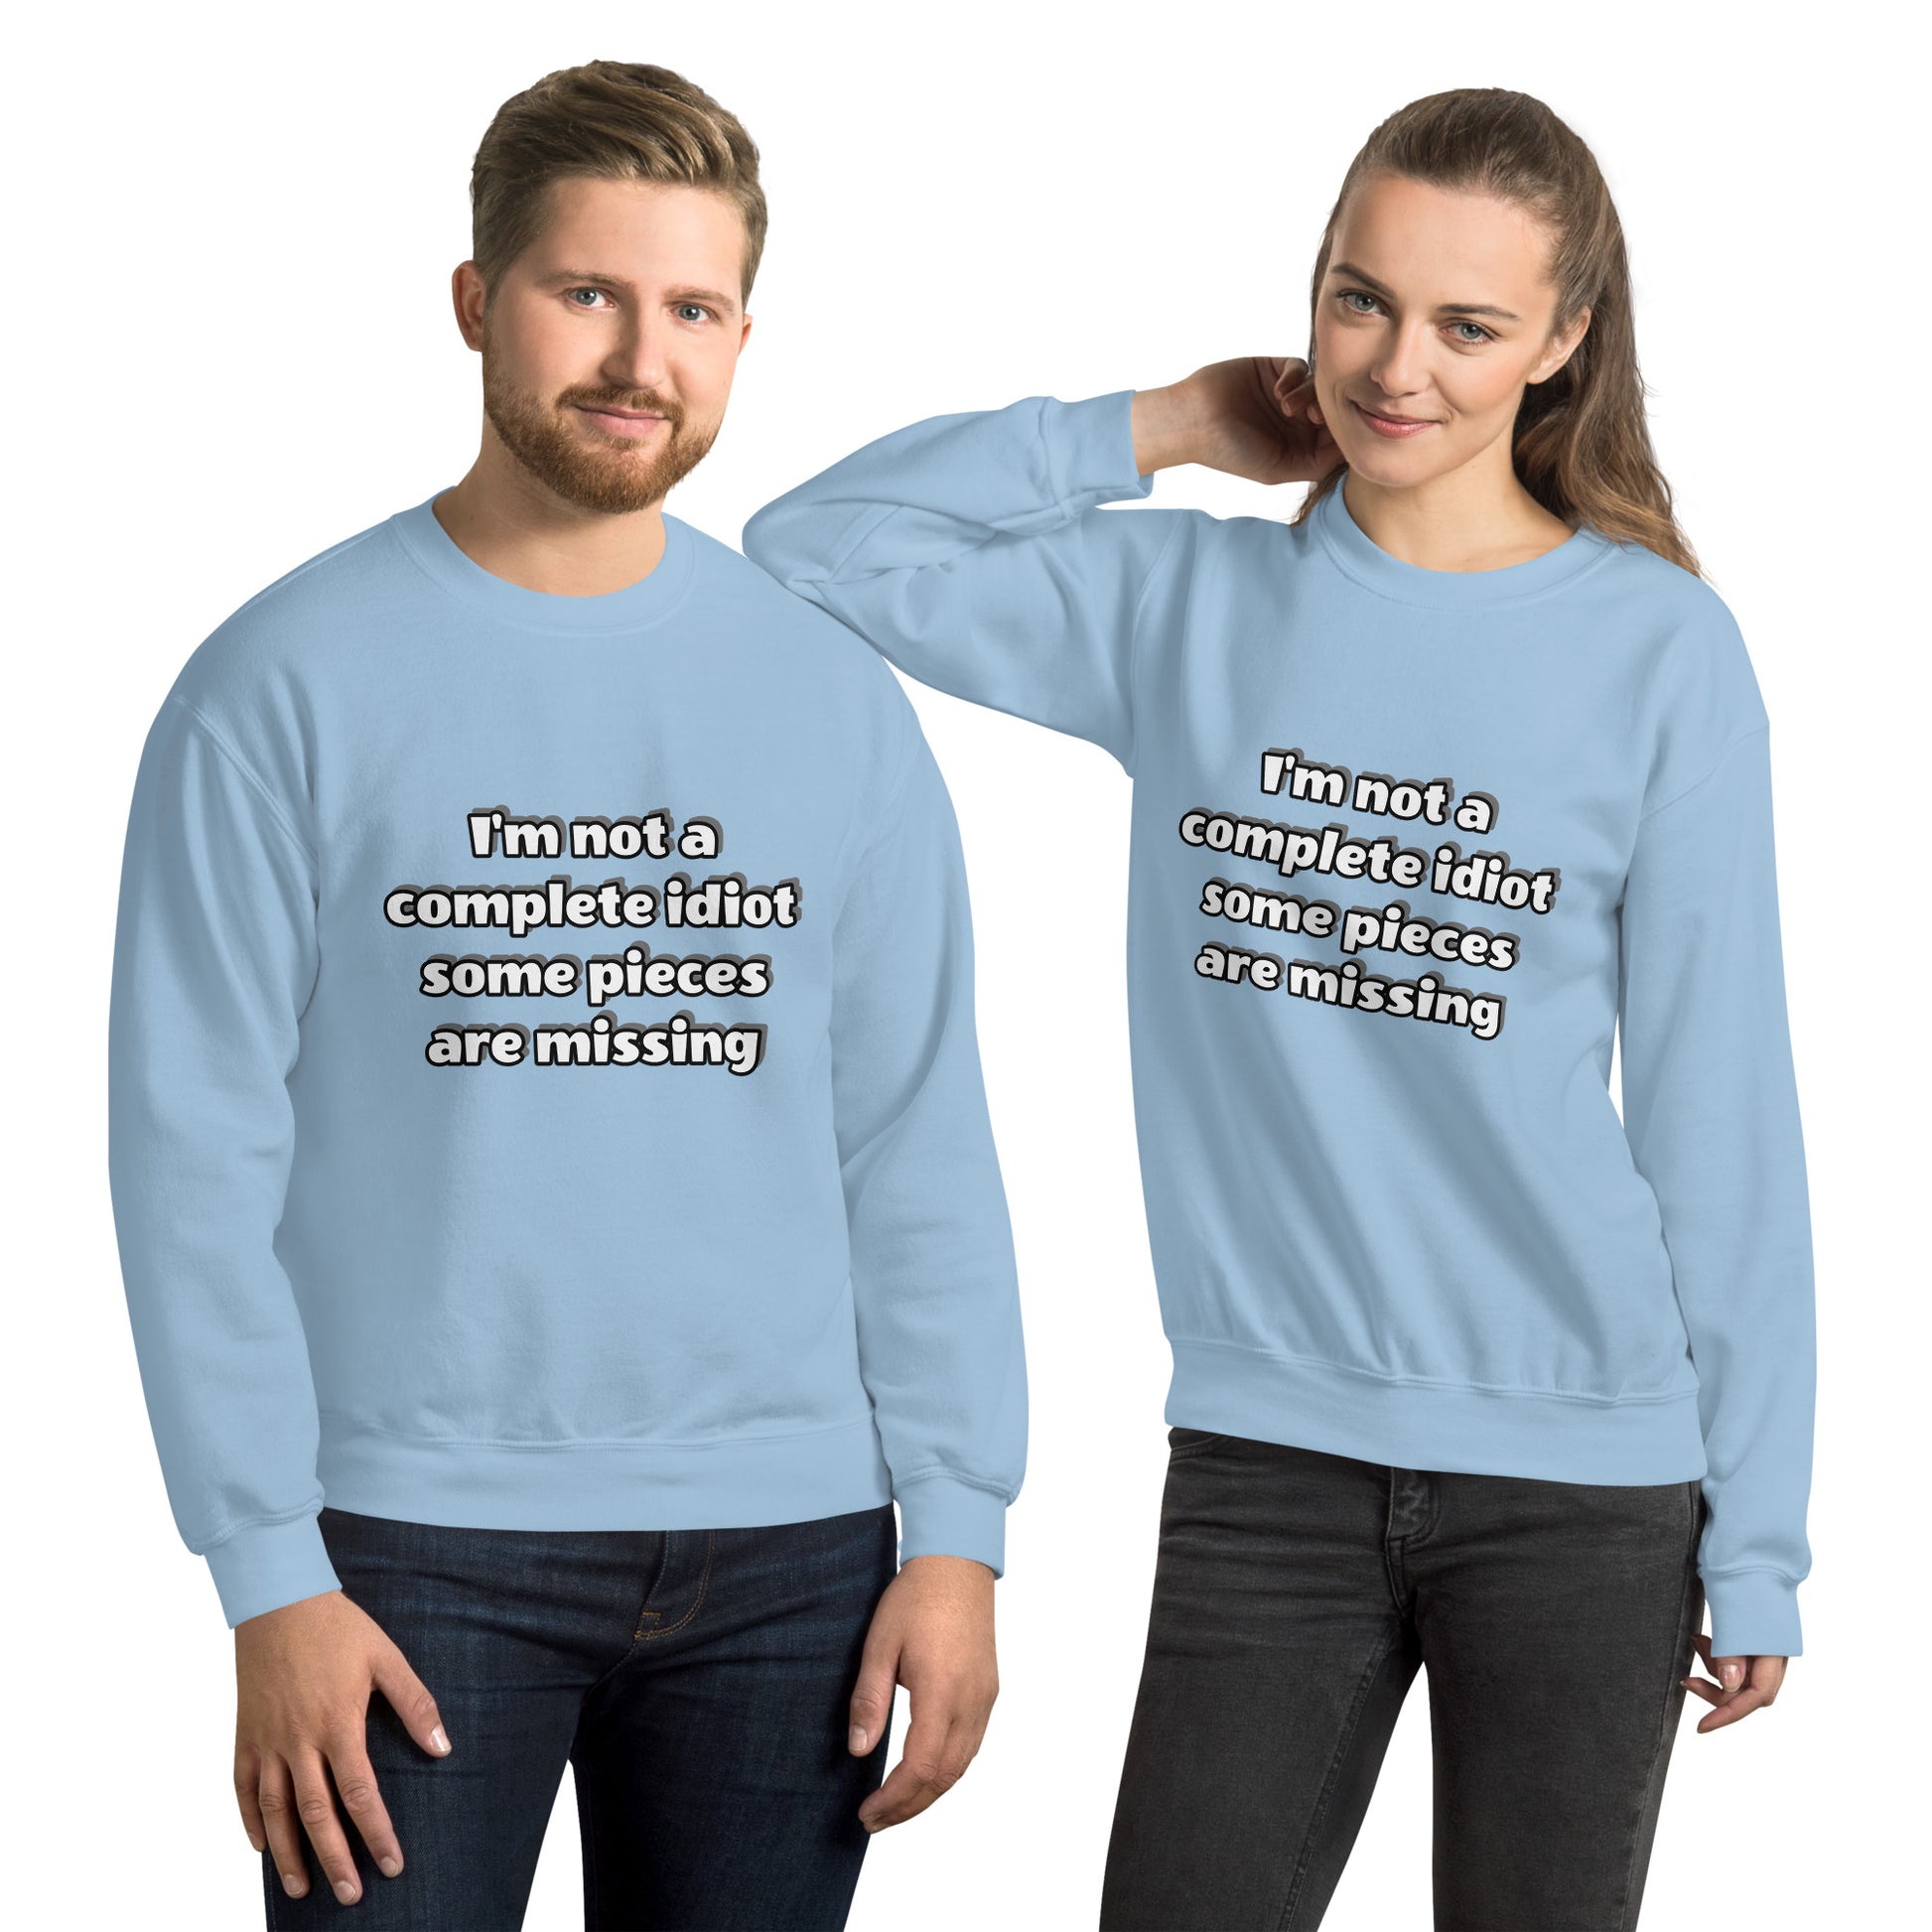 Man and women with light blue sweatshirt with text “I’m not a complete idiot, some pieces are missing”